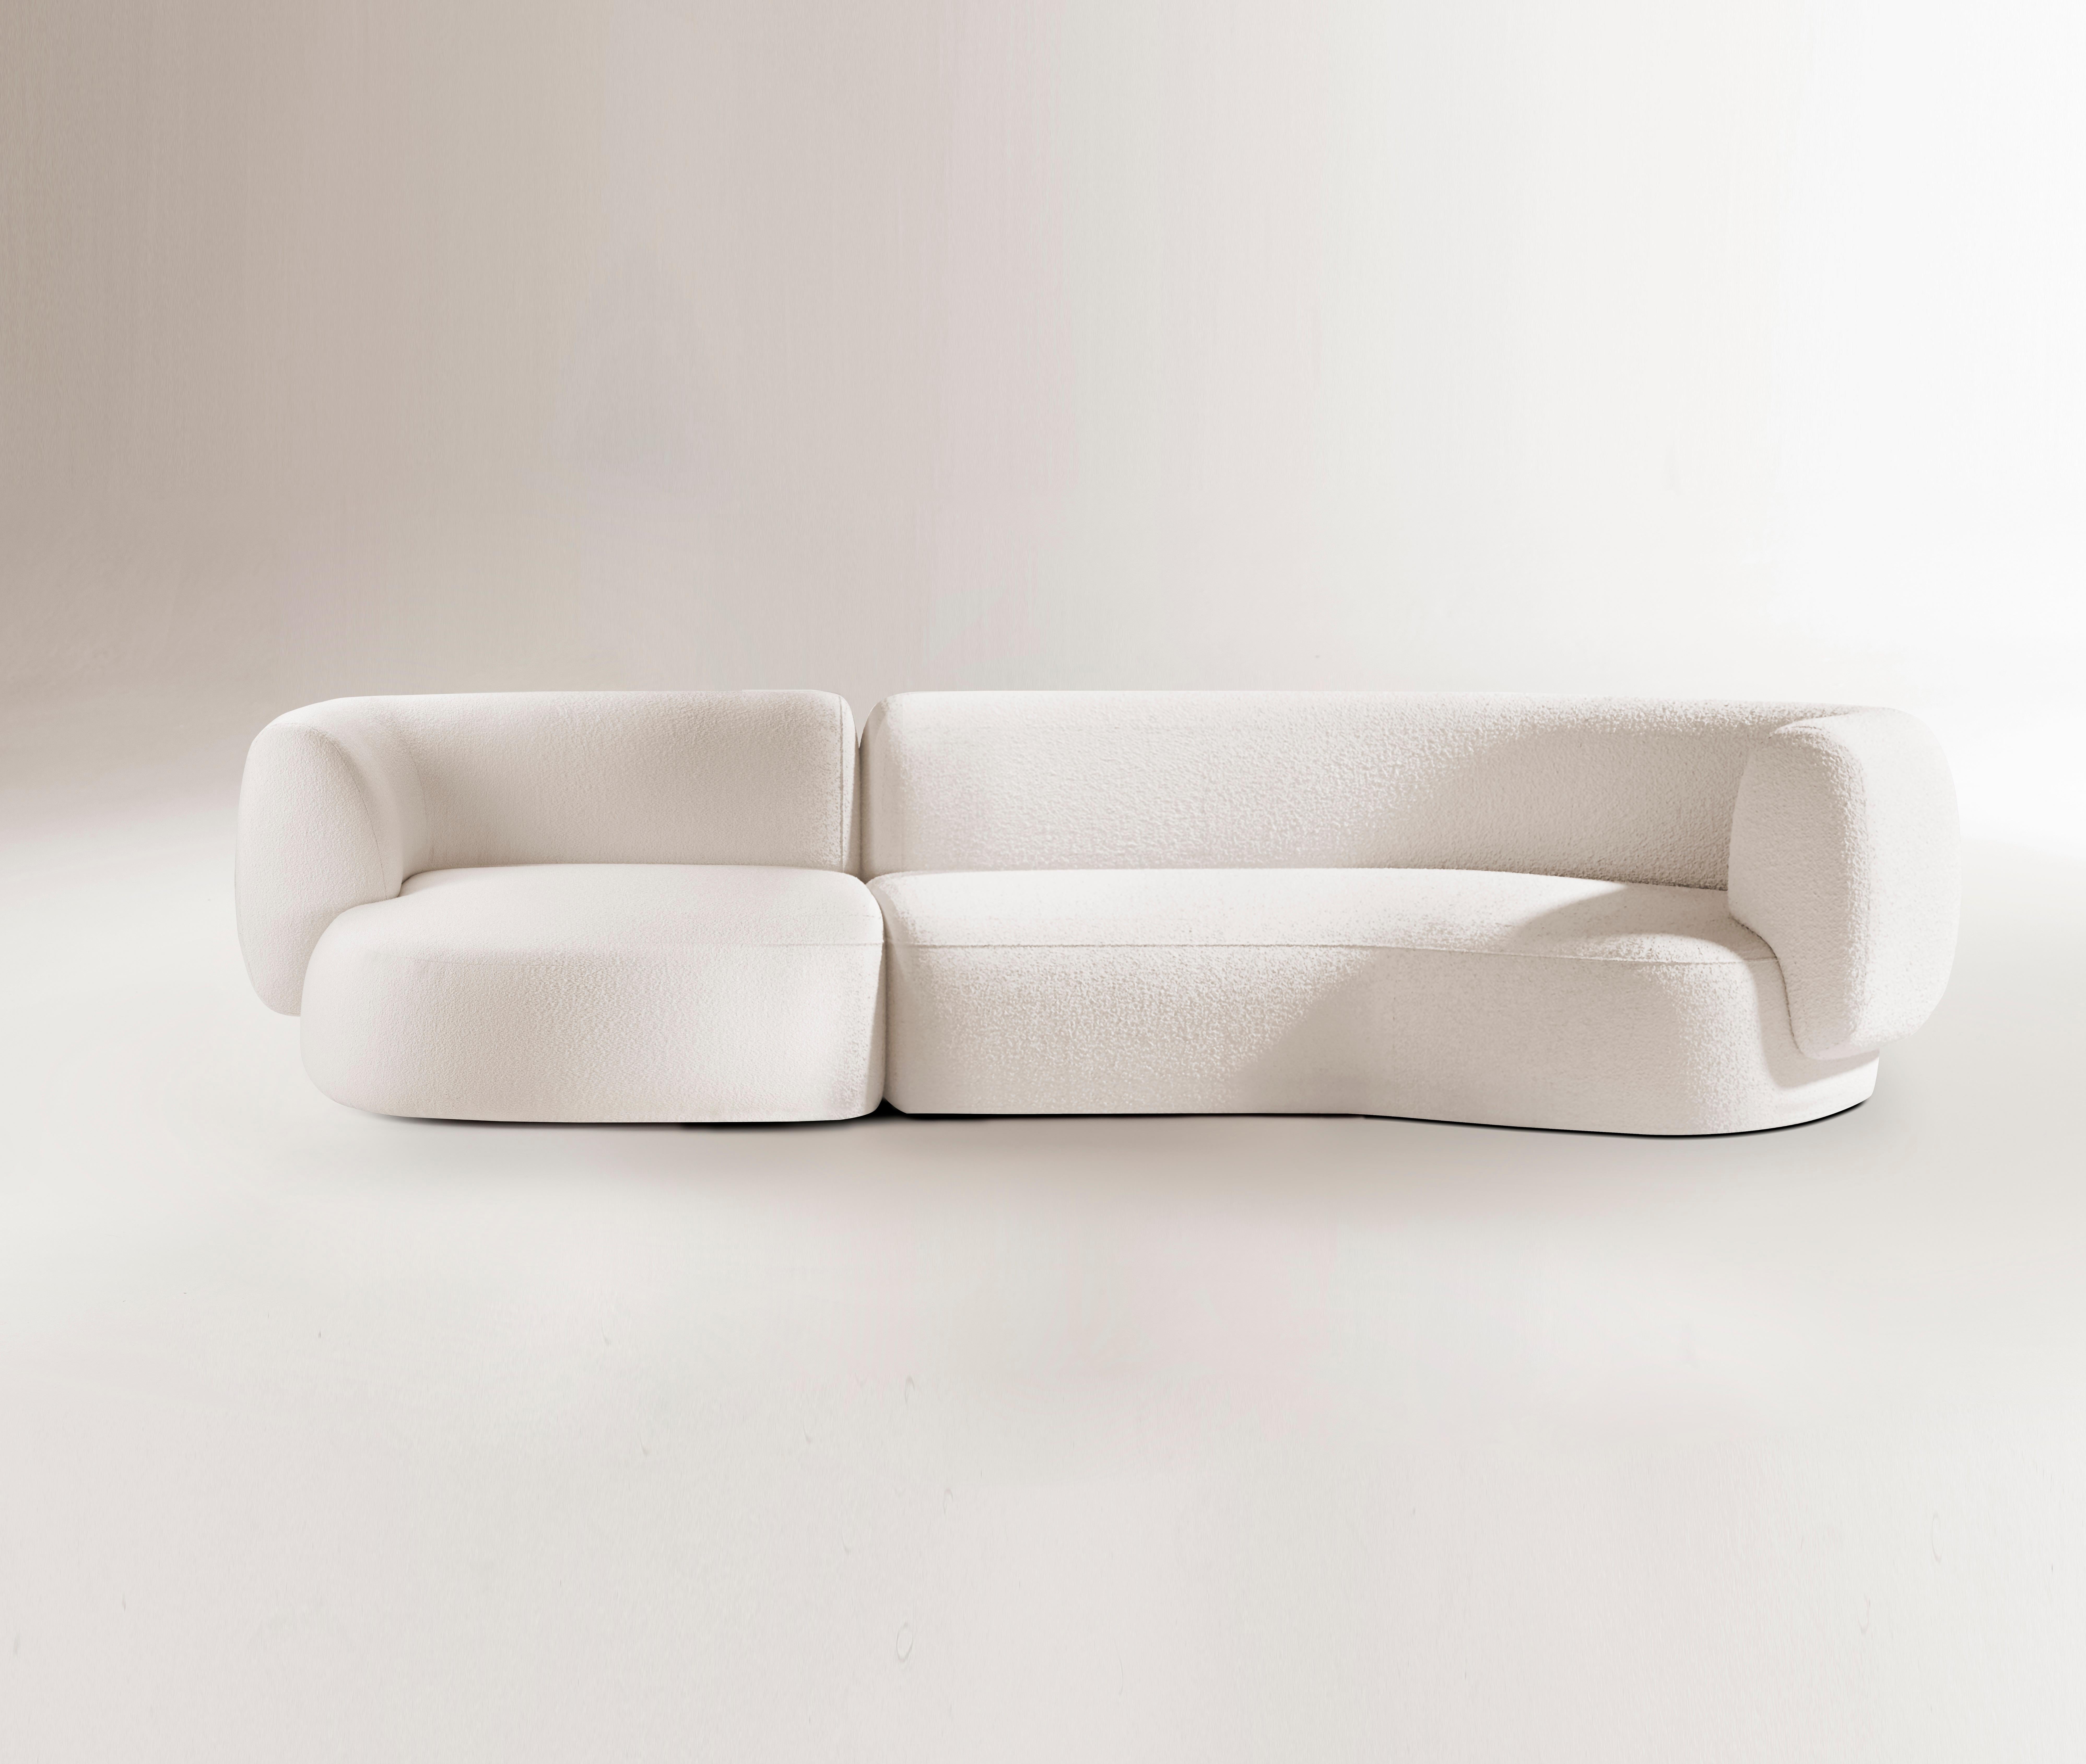 Hug modular sofa by Collector
Dimensions: W 320 x D 98 x H 74 cm.
35º Element module: W 200 x D 98 x H 74 cm.
DX terminal element module: W 120 x D 98 x H 74 cm.
Materials: Fabric, solid oak wood.

This sofa is composed of one DX Terminal